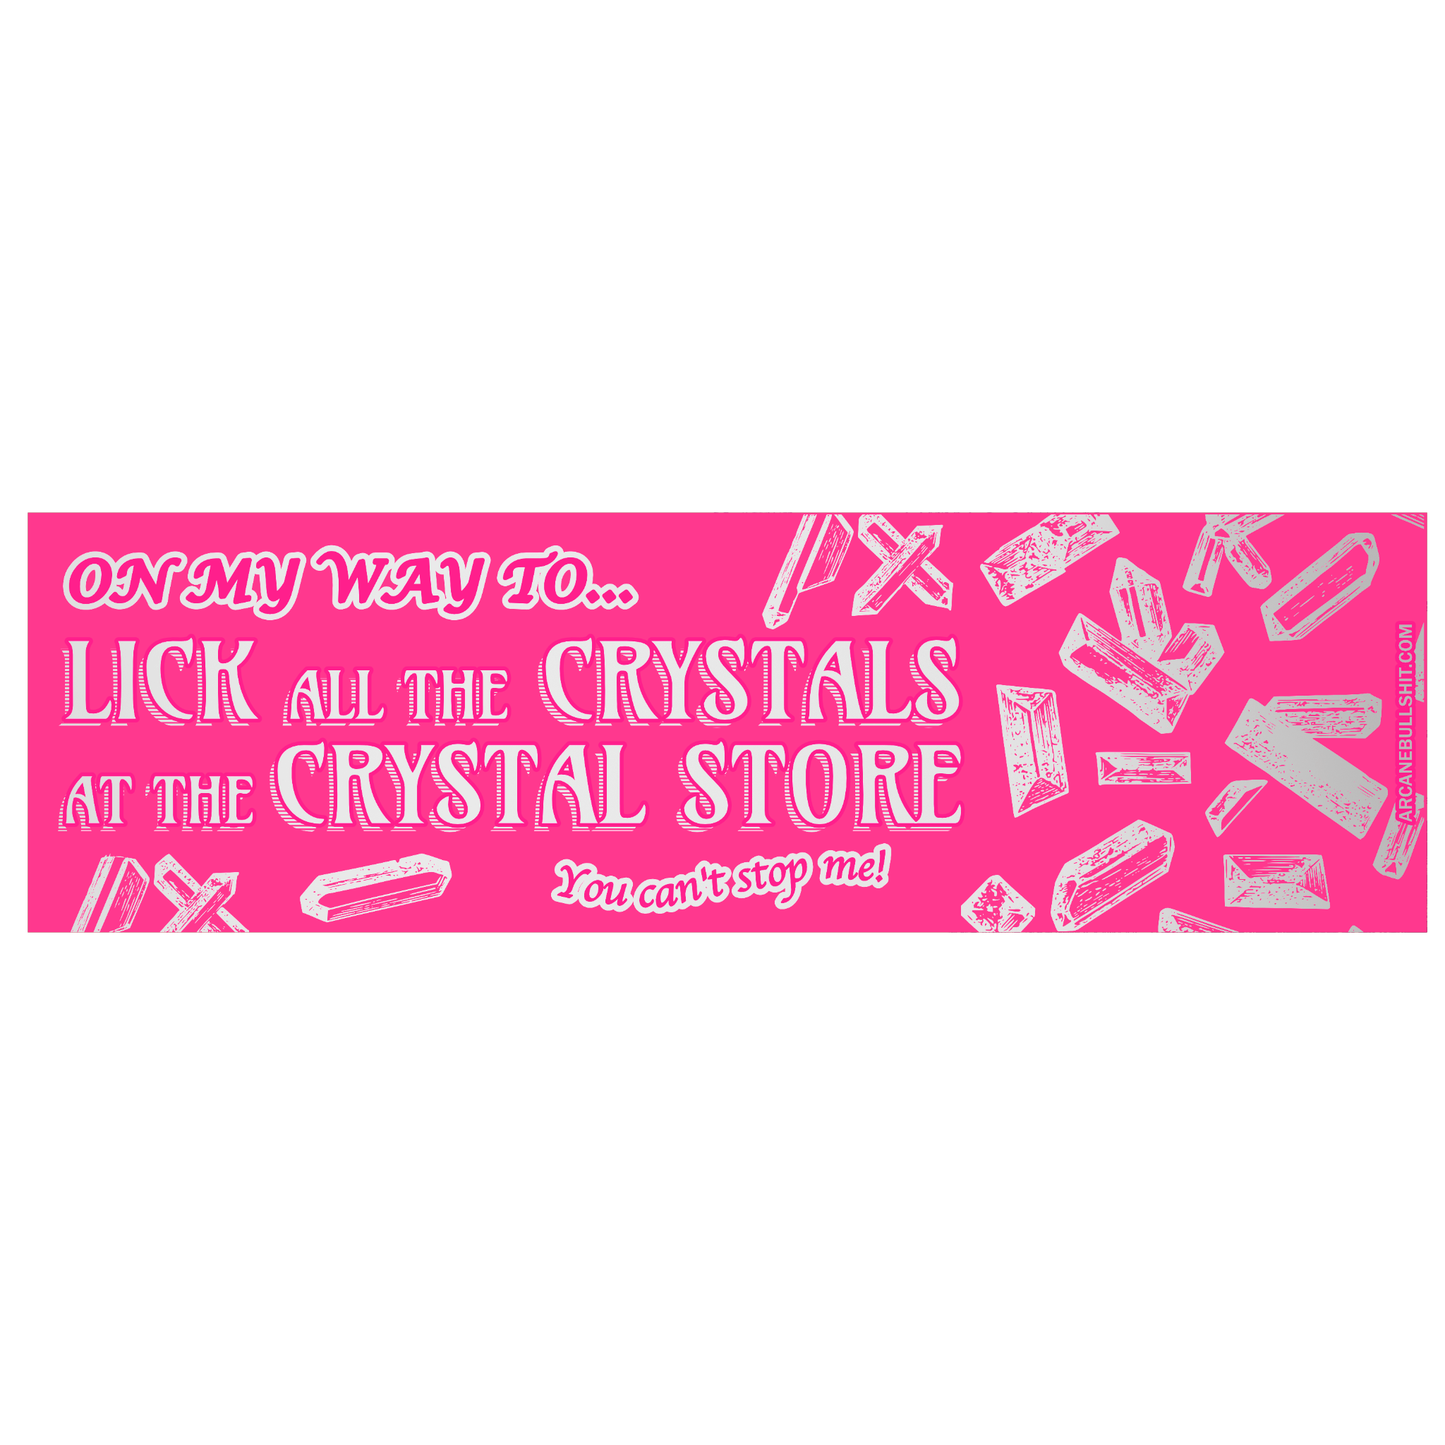 "On My Way To Lick All The Crystals" bumper sticker